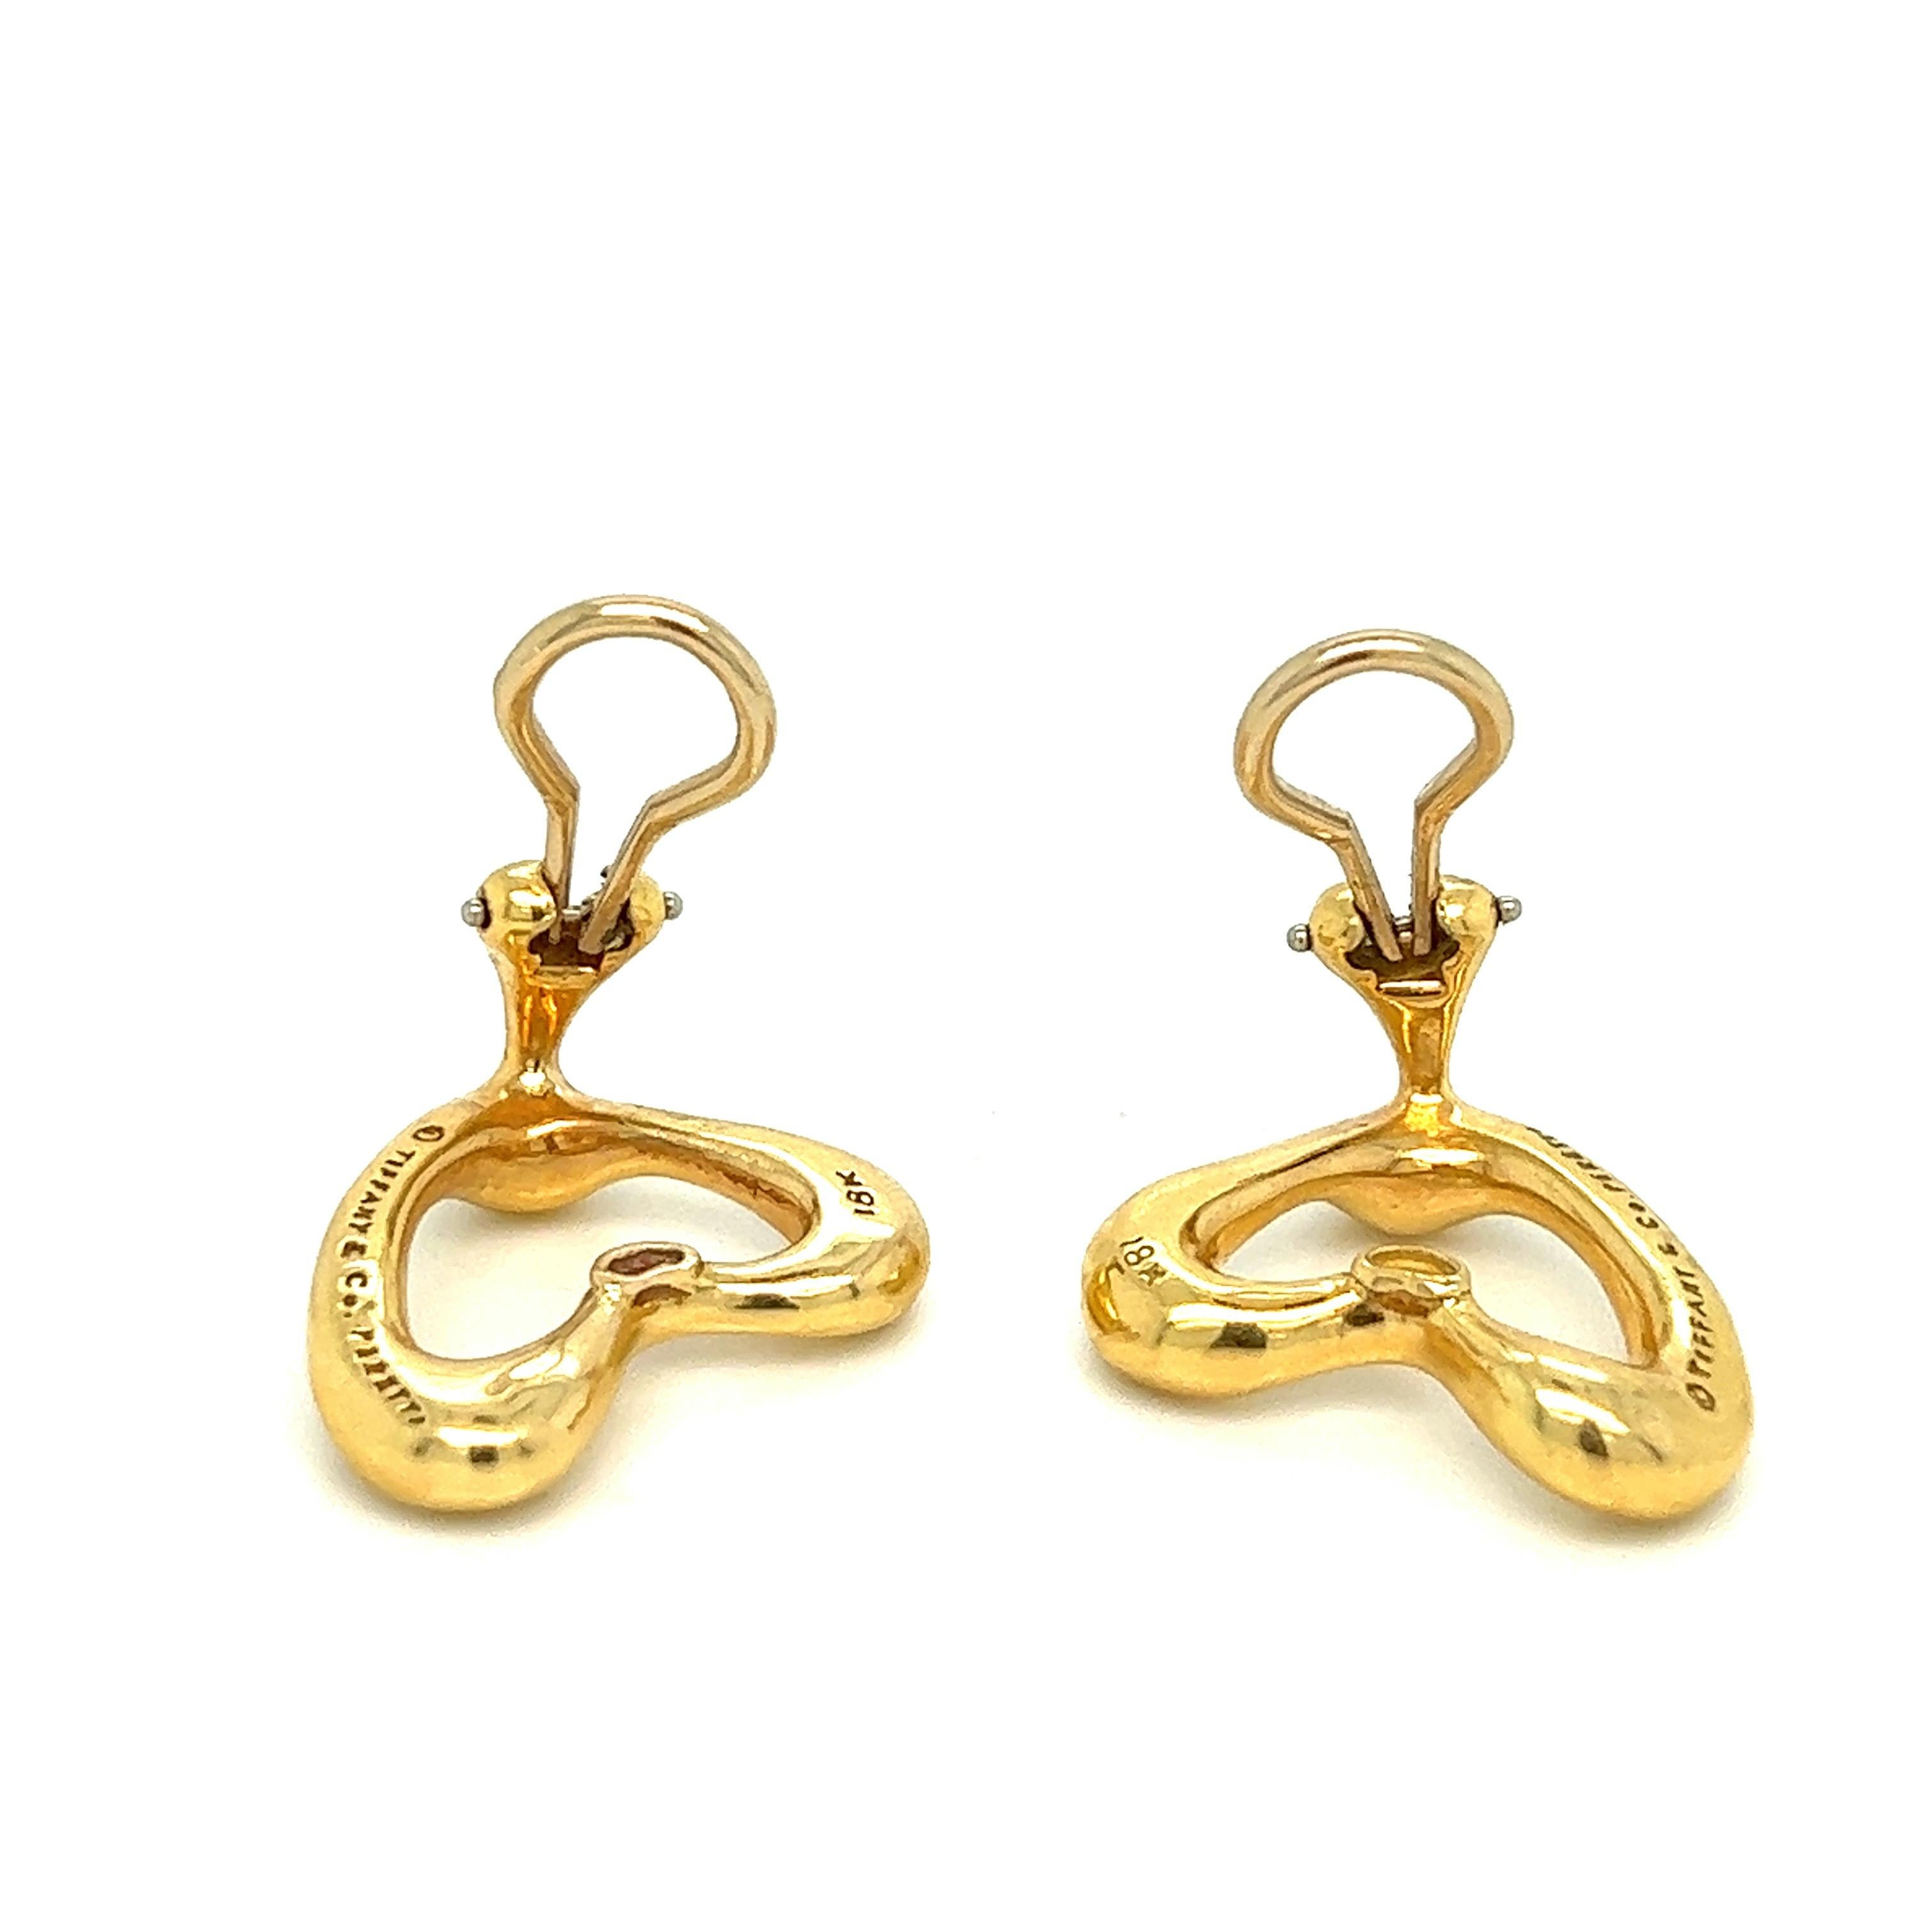 Elsa Peretti for Tiffany & Co. Gold Heart Ear Clips  In Excellent Condition For Sale In New York, NY